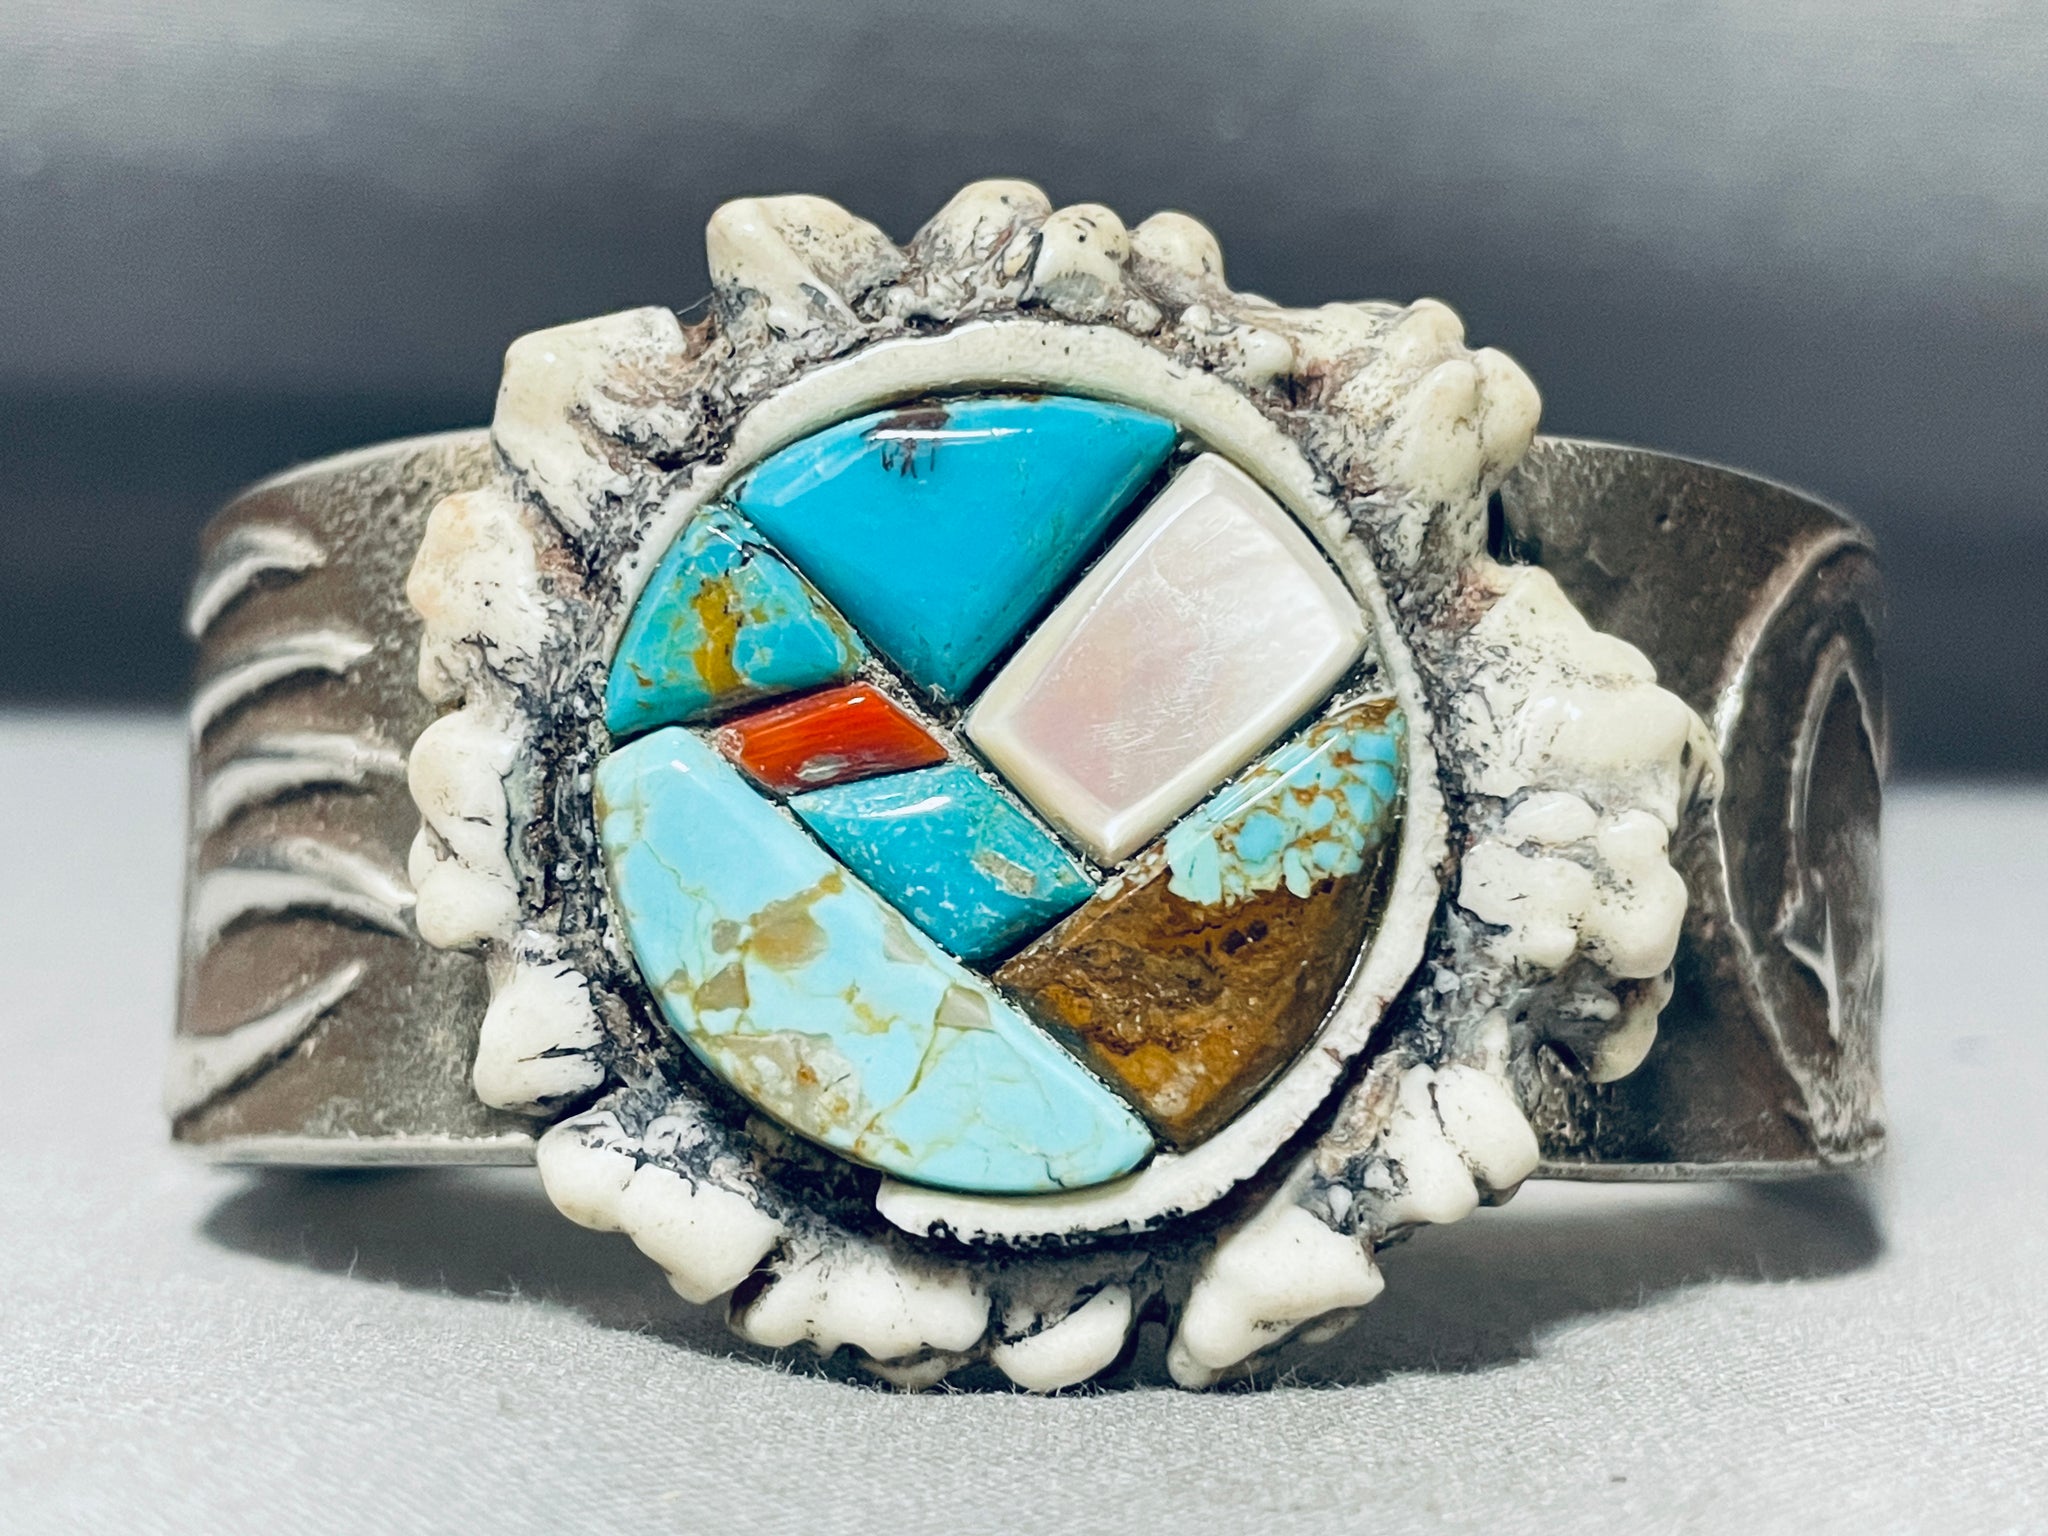 James Little Signed Navajo Turquoise Ring – Stacey Fay Designs